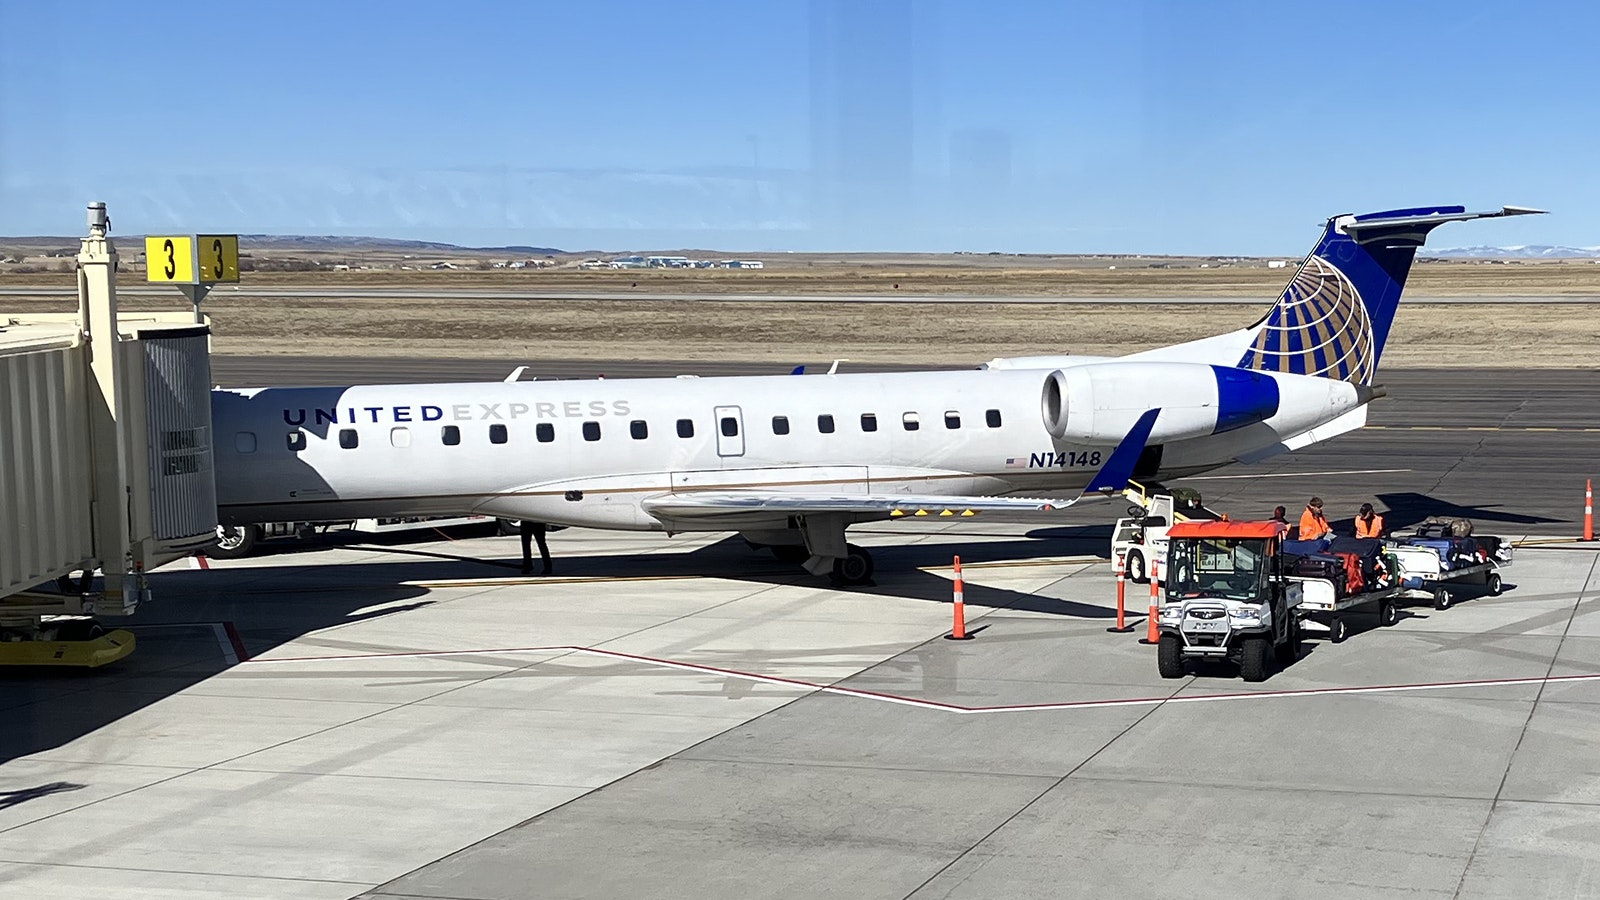 Normal operations at Casper/Natrona County International Airport were halted for part of Monday morning after an employee became cleaning up a substance from a restroom floor.